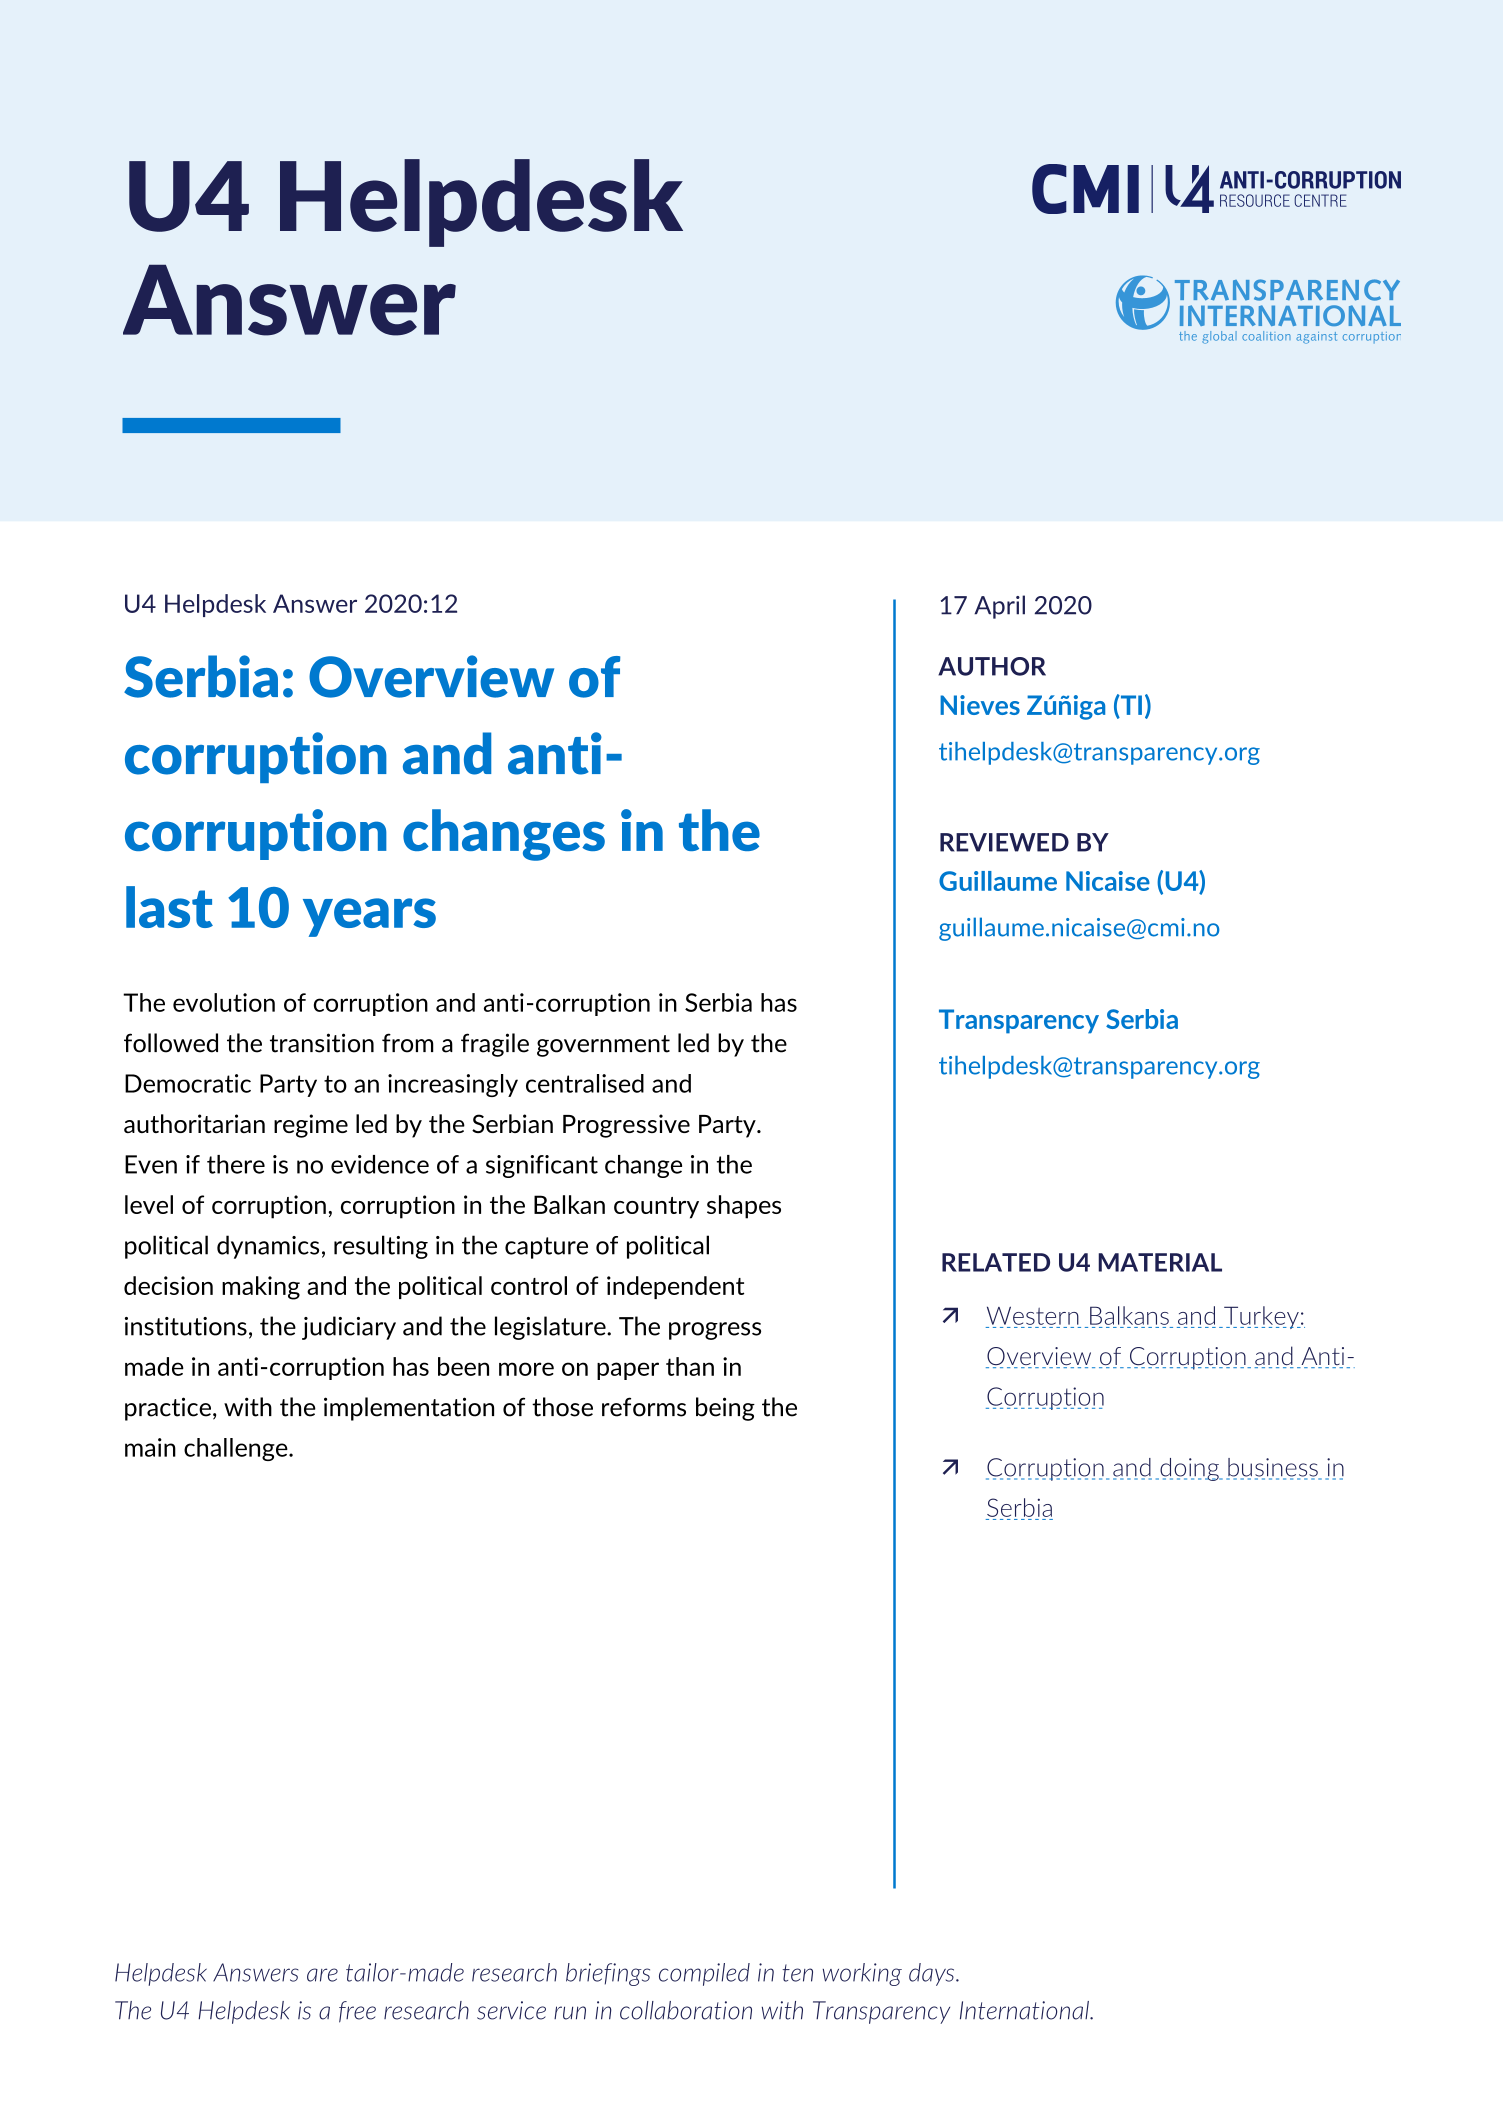 Serbia: Overview of corruption and anti-corruption changes in the last 10 years